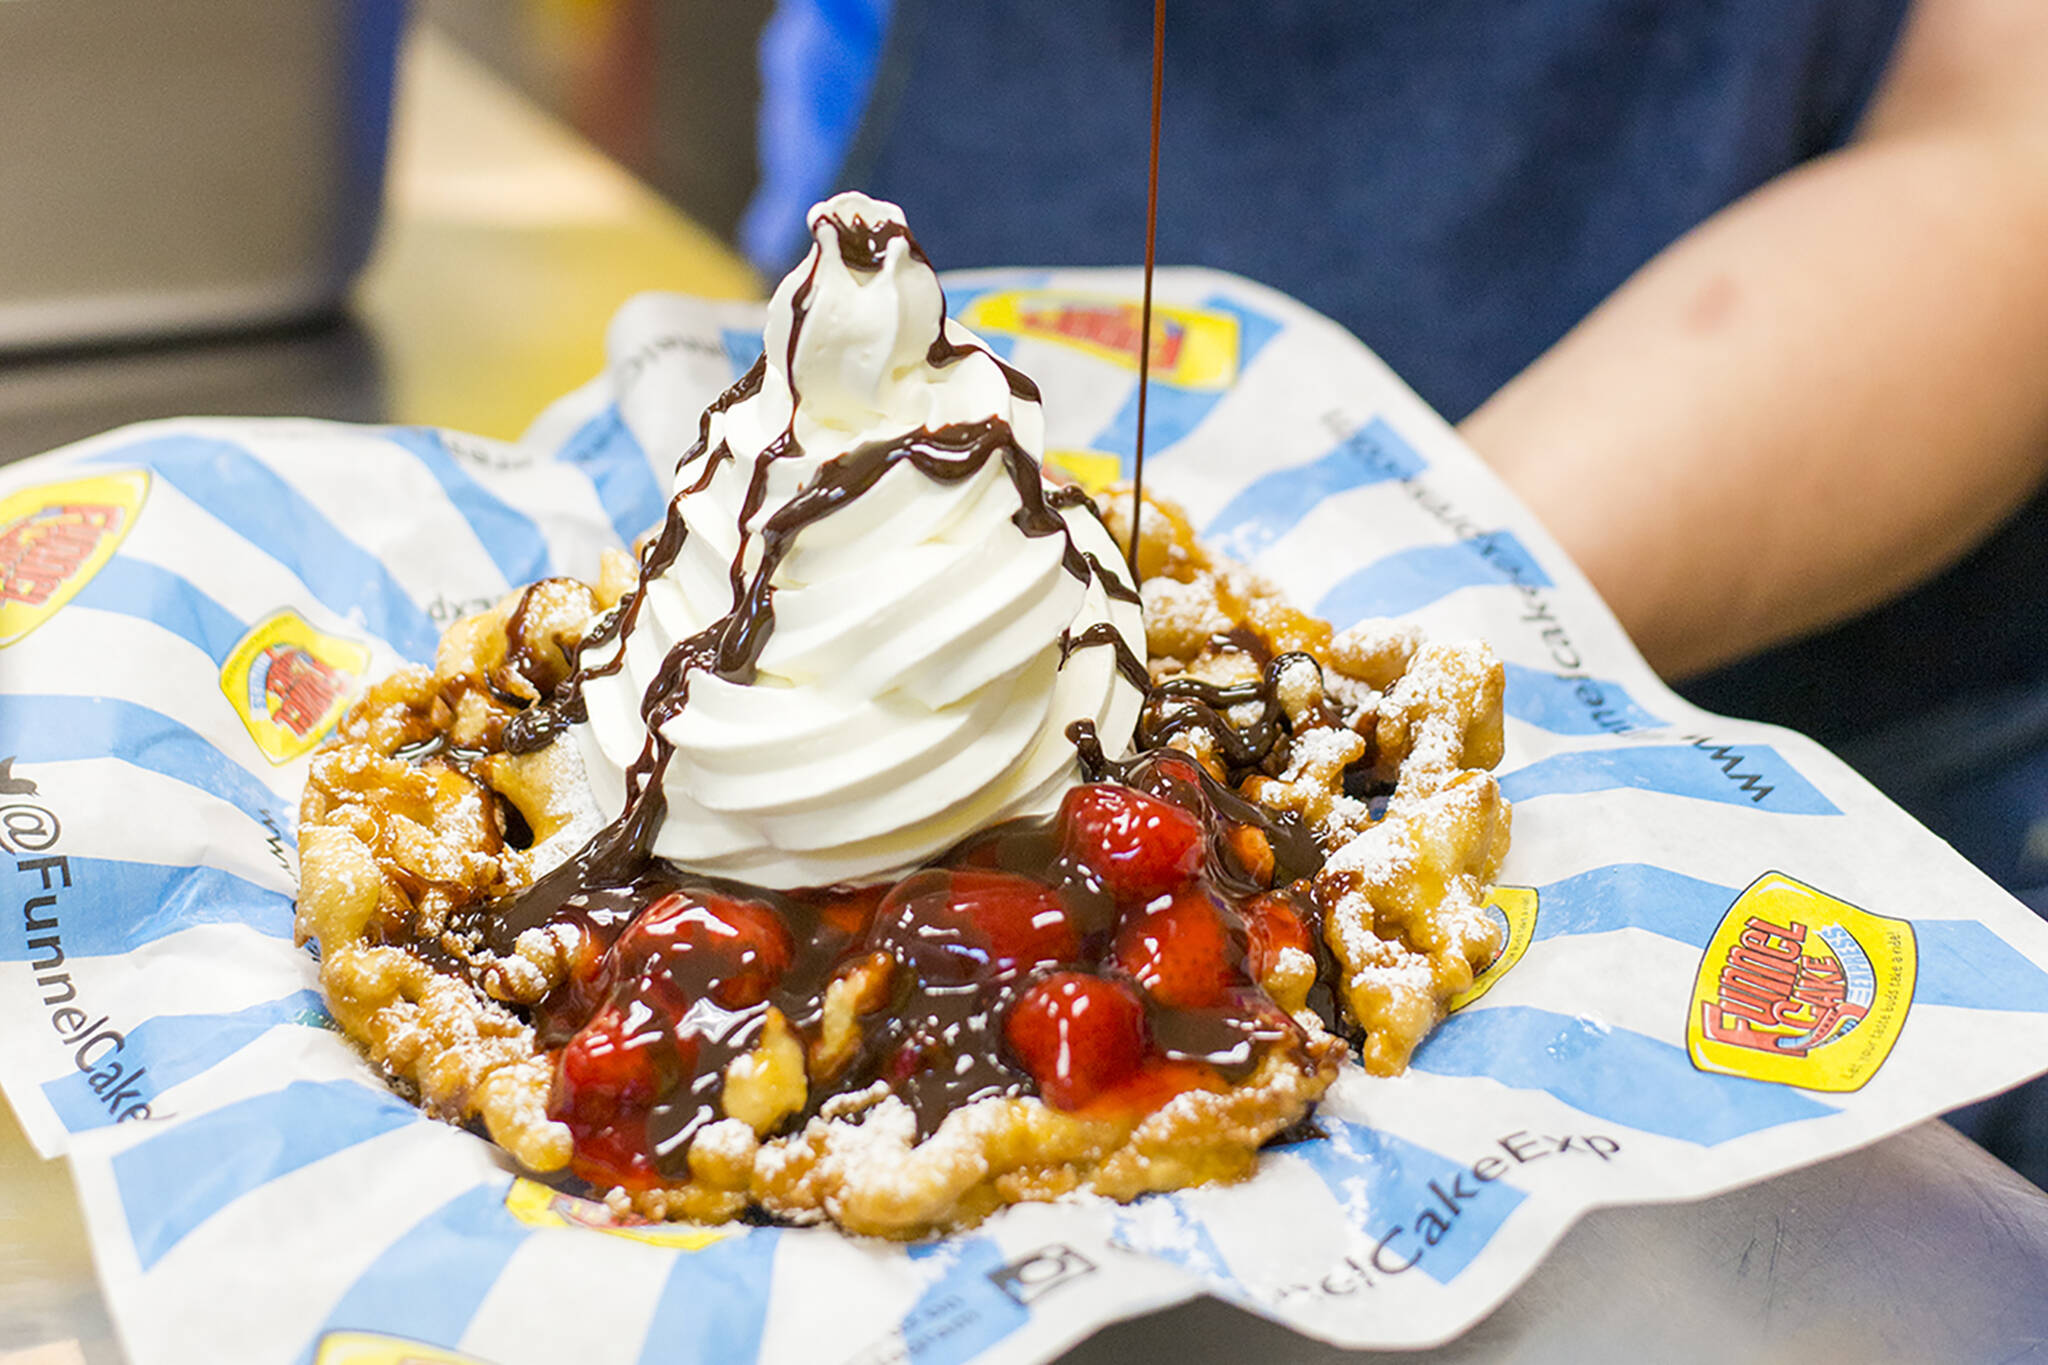 You can now get funnel cake kits in Toronto for takeout